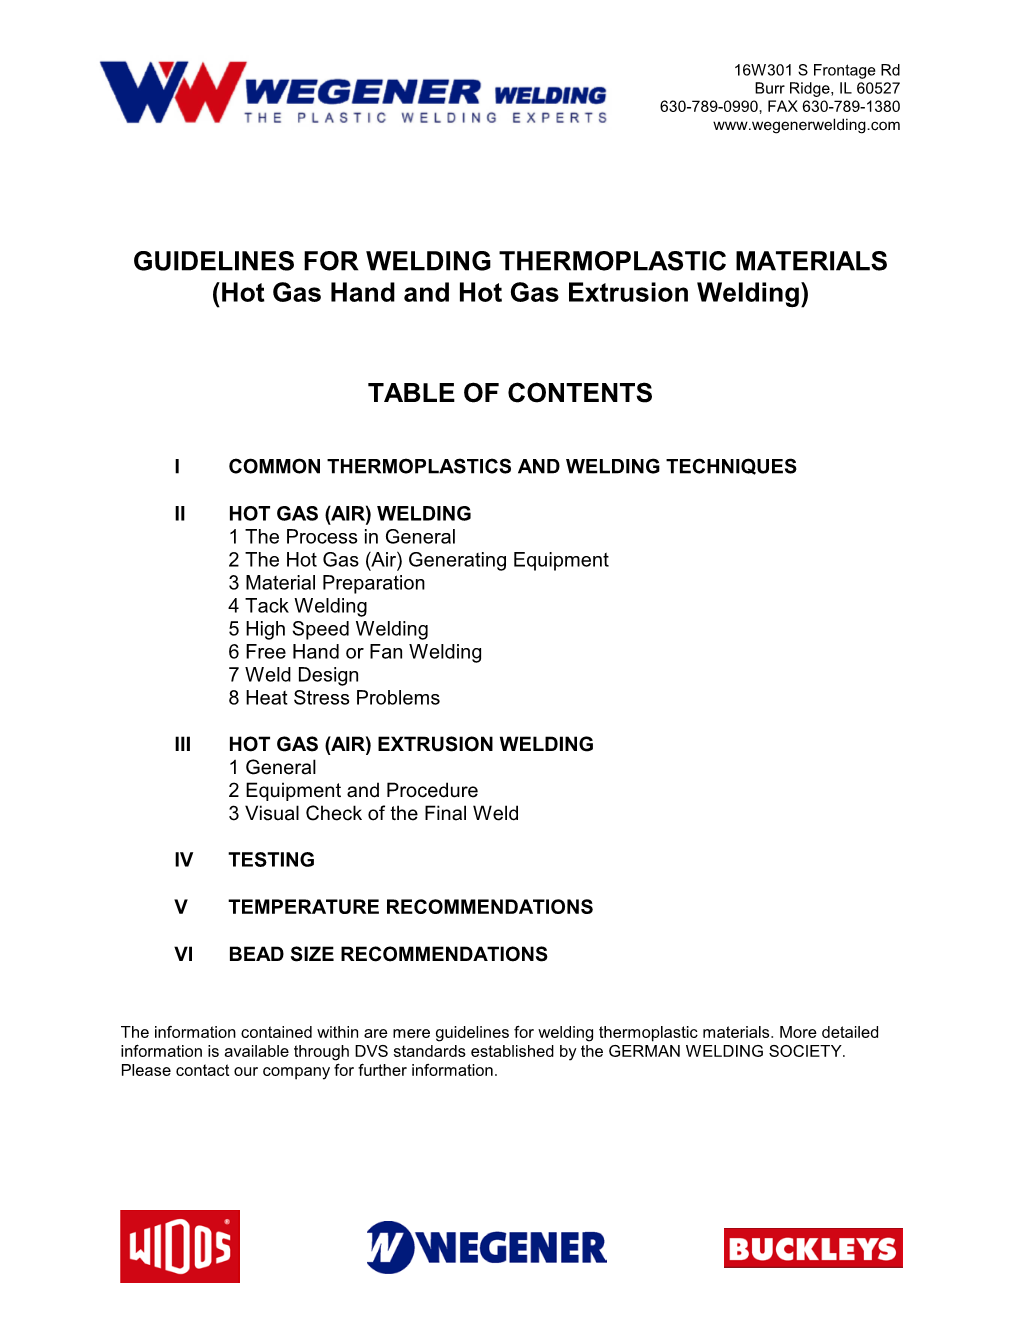 GUIDELINES for WELDING THERMOPLASTIC MATERIALS (Hot Gas Hand and Hot Gas Extrusion Welding)